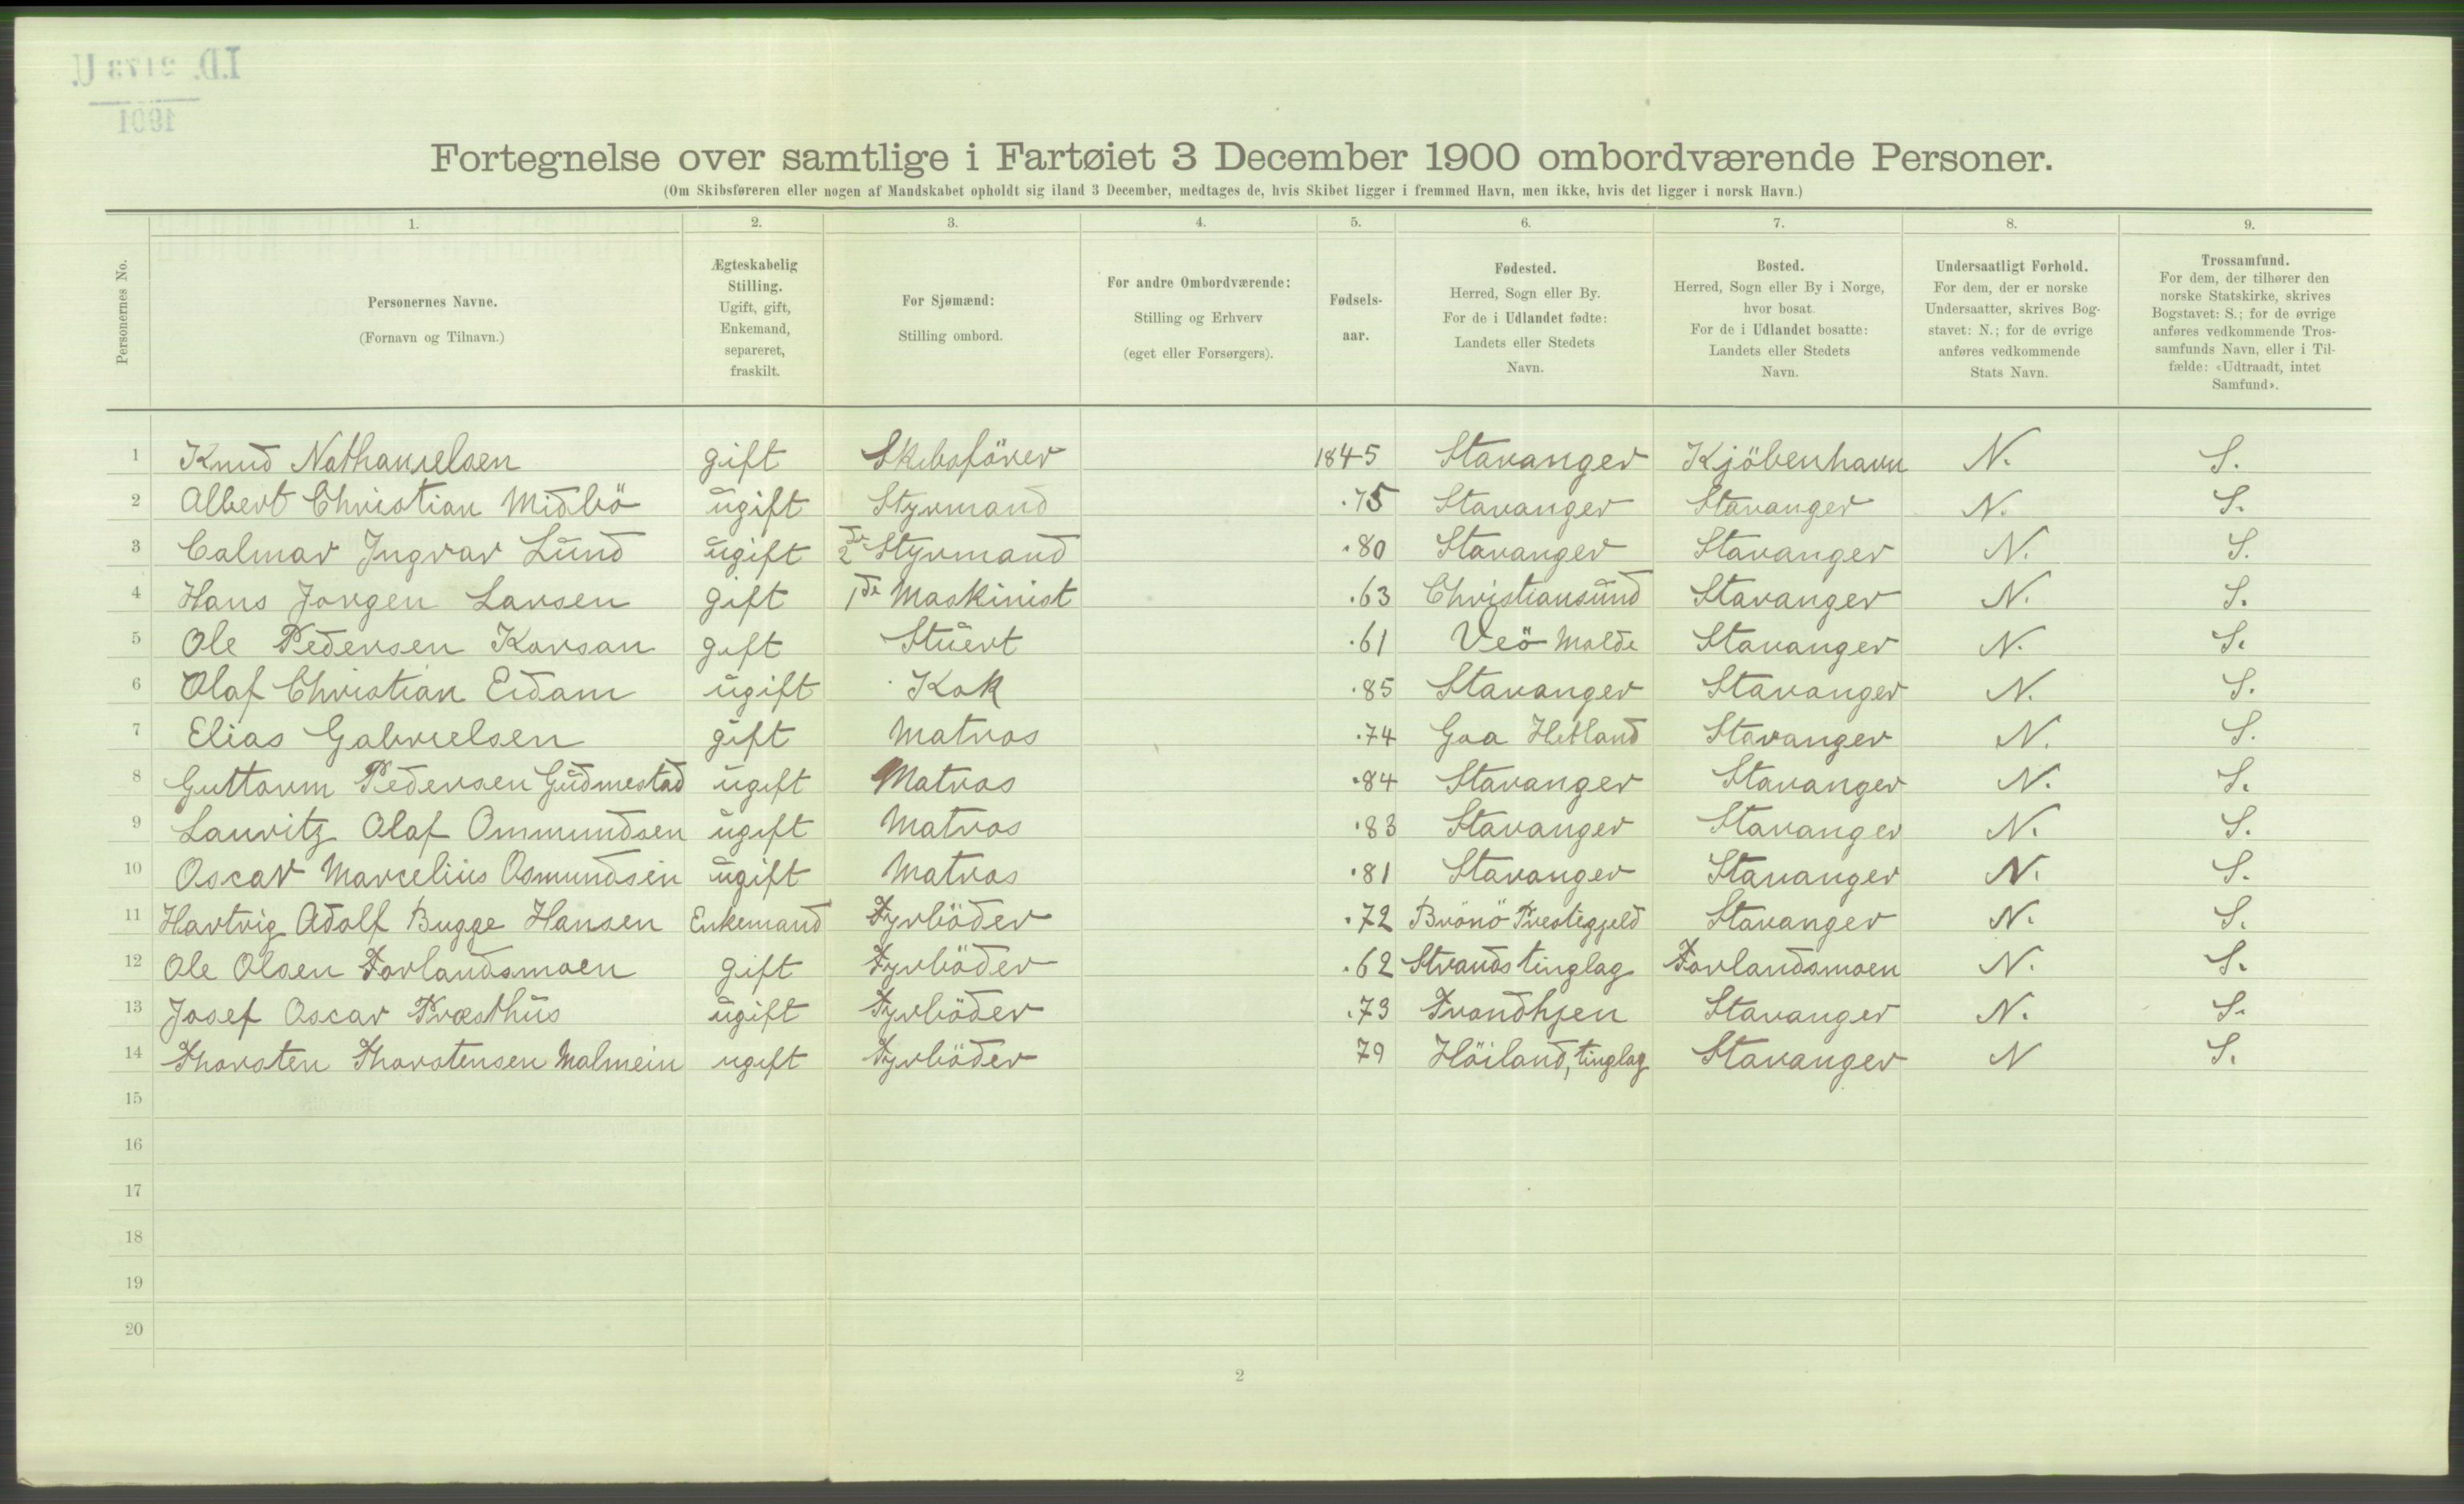 RA, 1900 Census - ship lists from ships in Norwegian harbours, harbours abroad and at sea, 1900, p. 5628